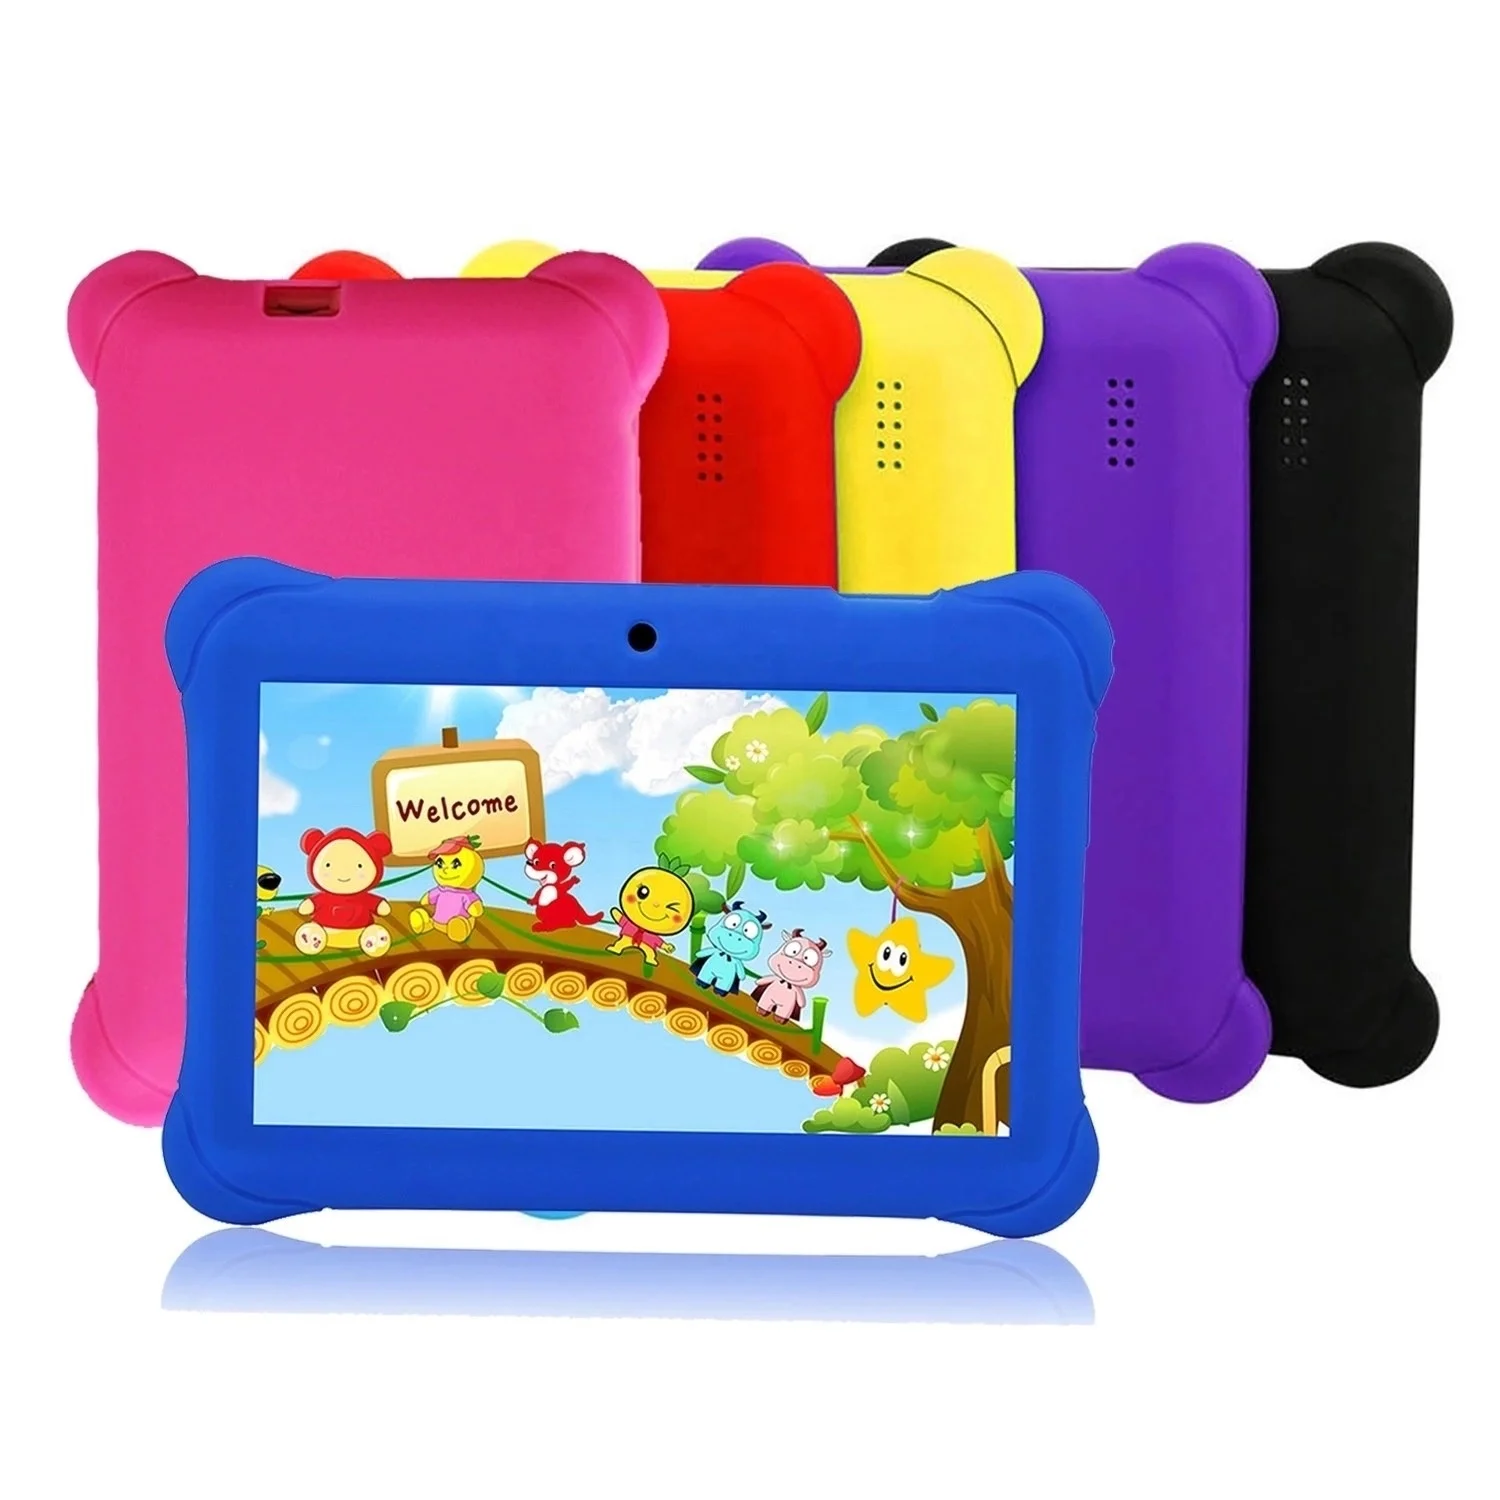 

Bulk Wholesale Kids Android Tablet 7 inch 1GB RAM 16GB ROM Android 6 Allwinner A33 Quad Core PC WIFI Q88 Education Tablet